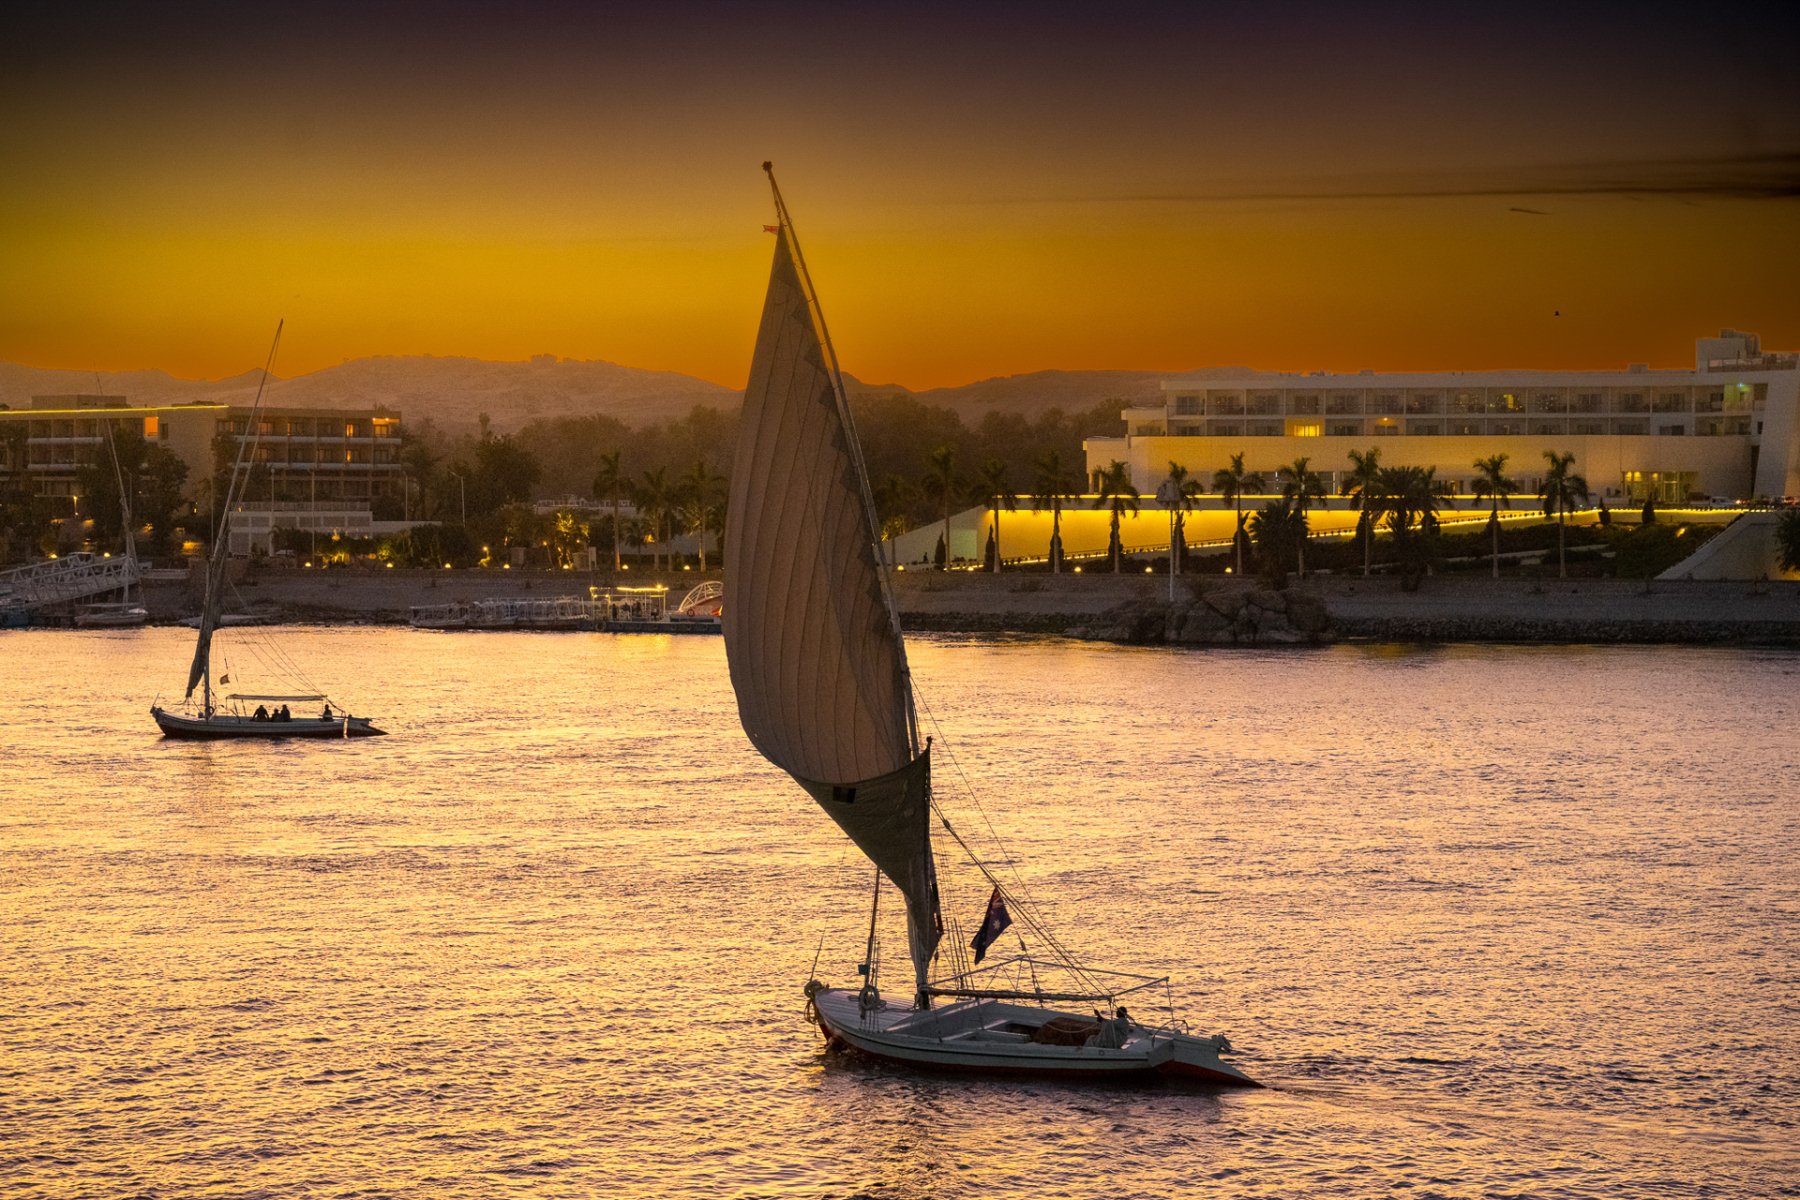 H529_Alistair How_5487_Sunset on the Nile_First.jpg